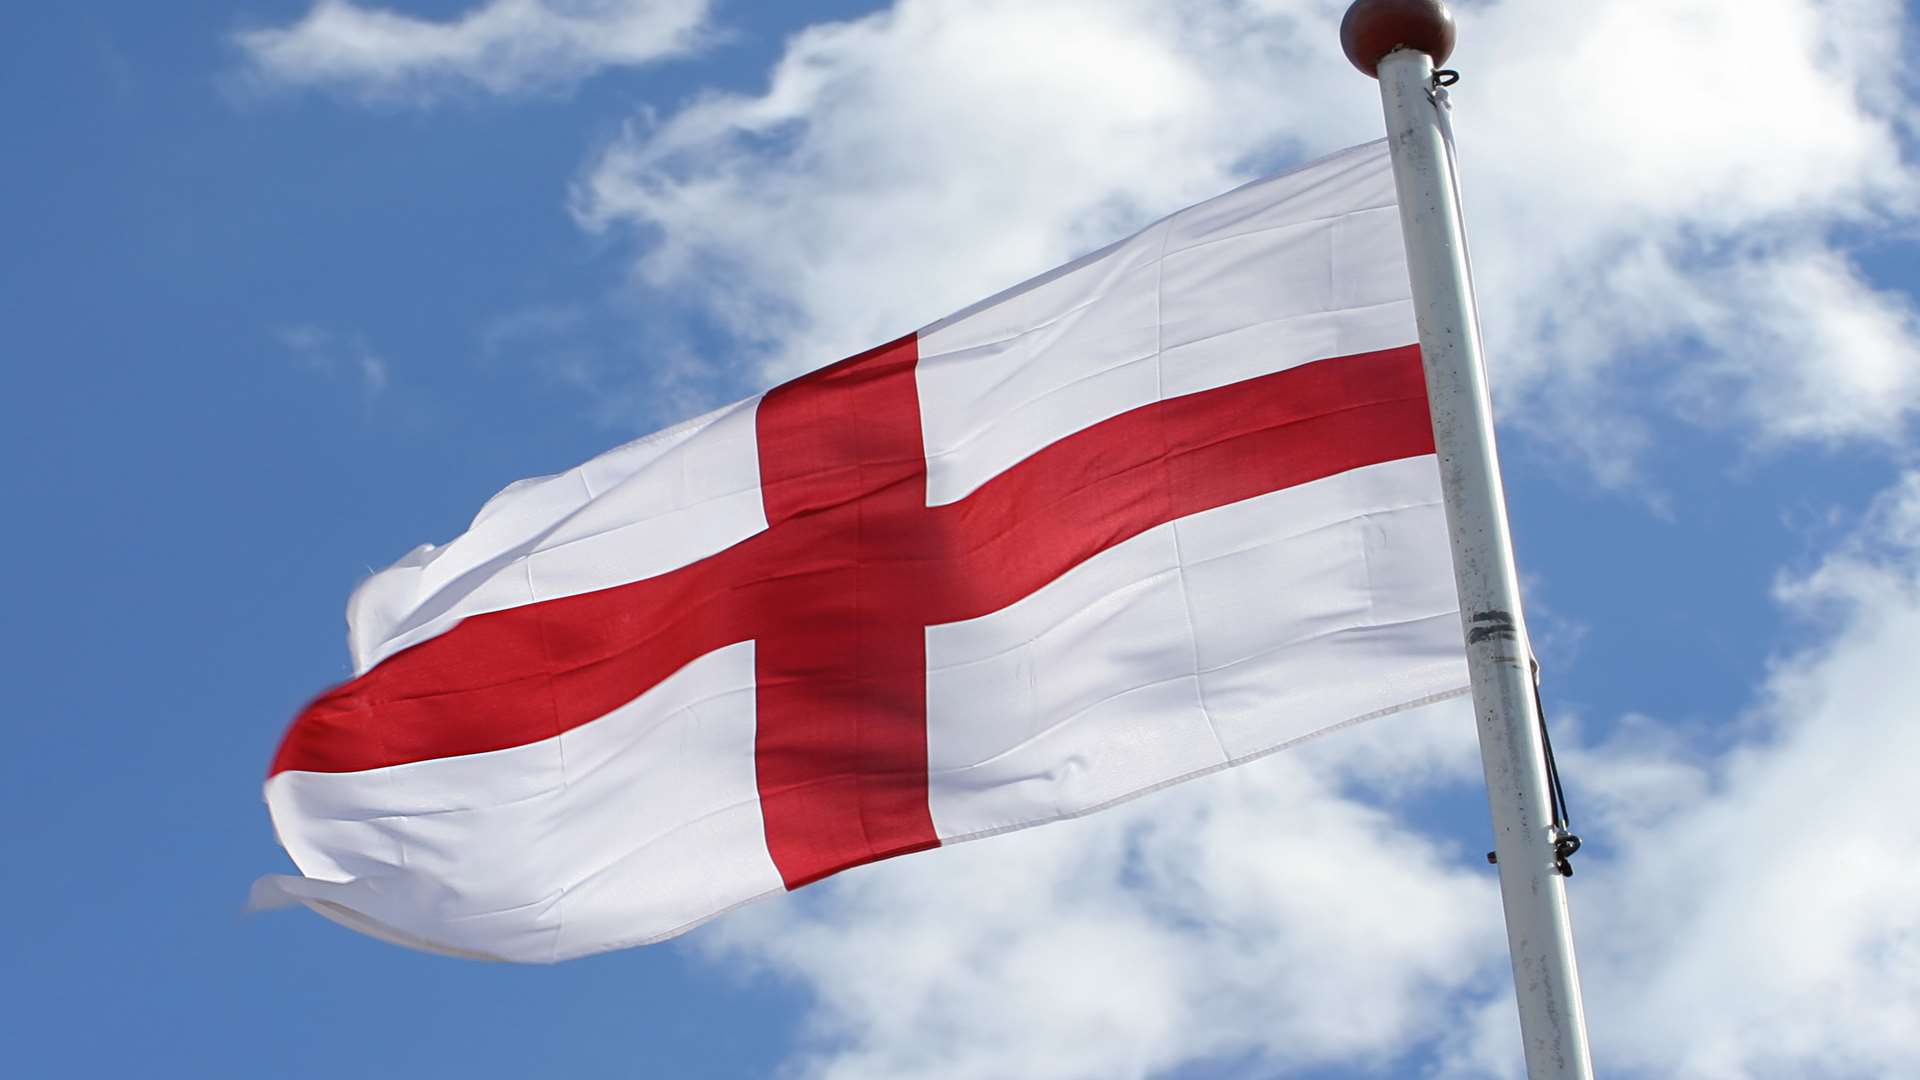 St George's Day is on Sunday, April 23